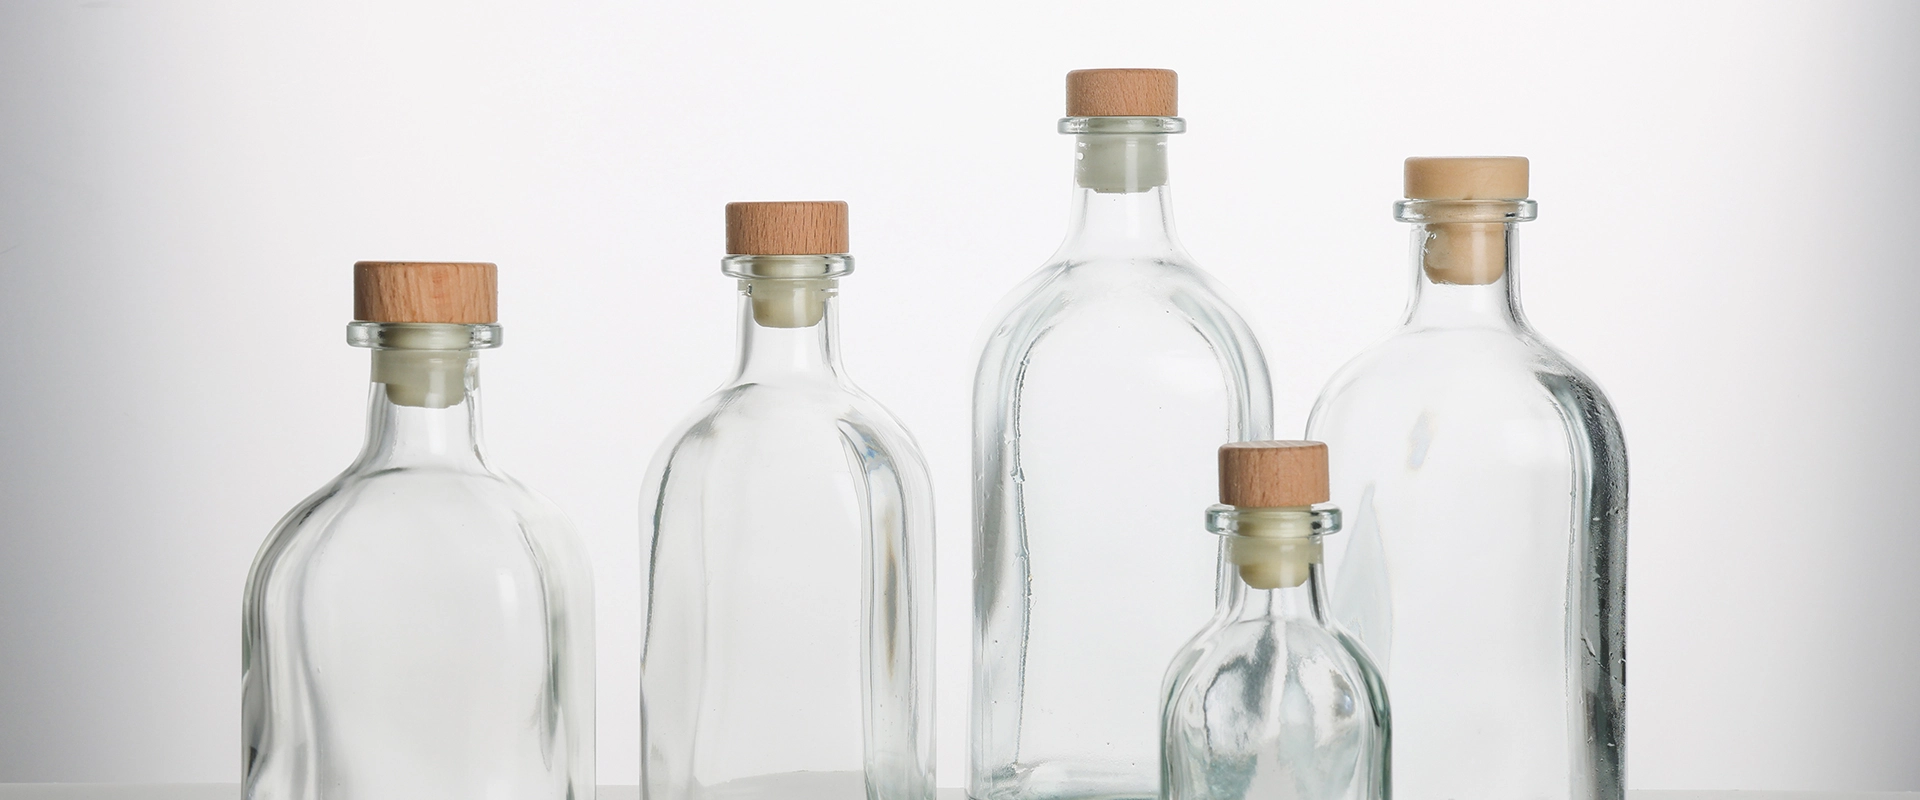 What Are 50-100ml Glass Bottles Commonly Used For?